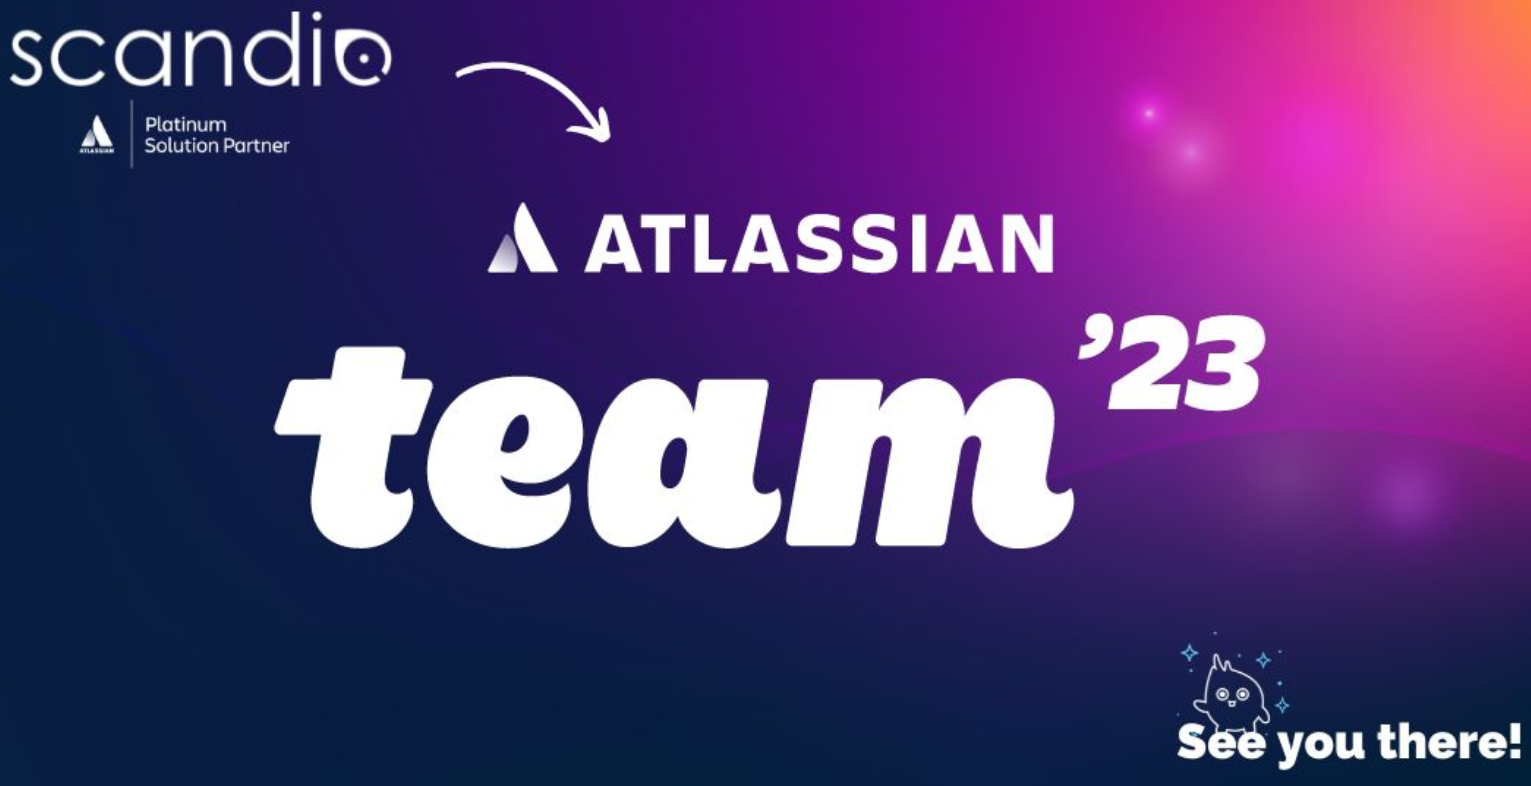 Get the latest news from Atlassian's TEAM'23 conference in Las Vegas